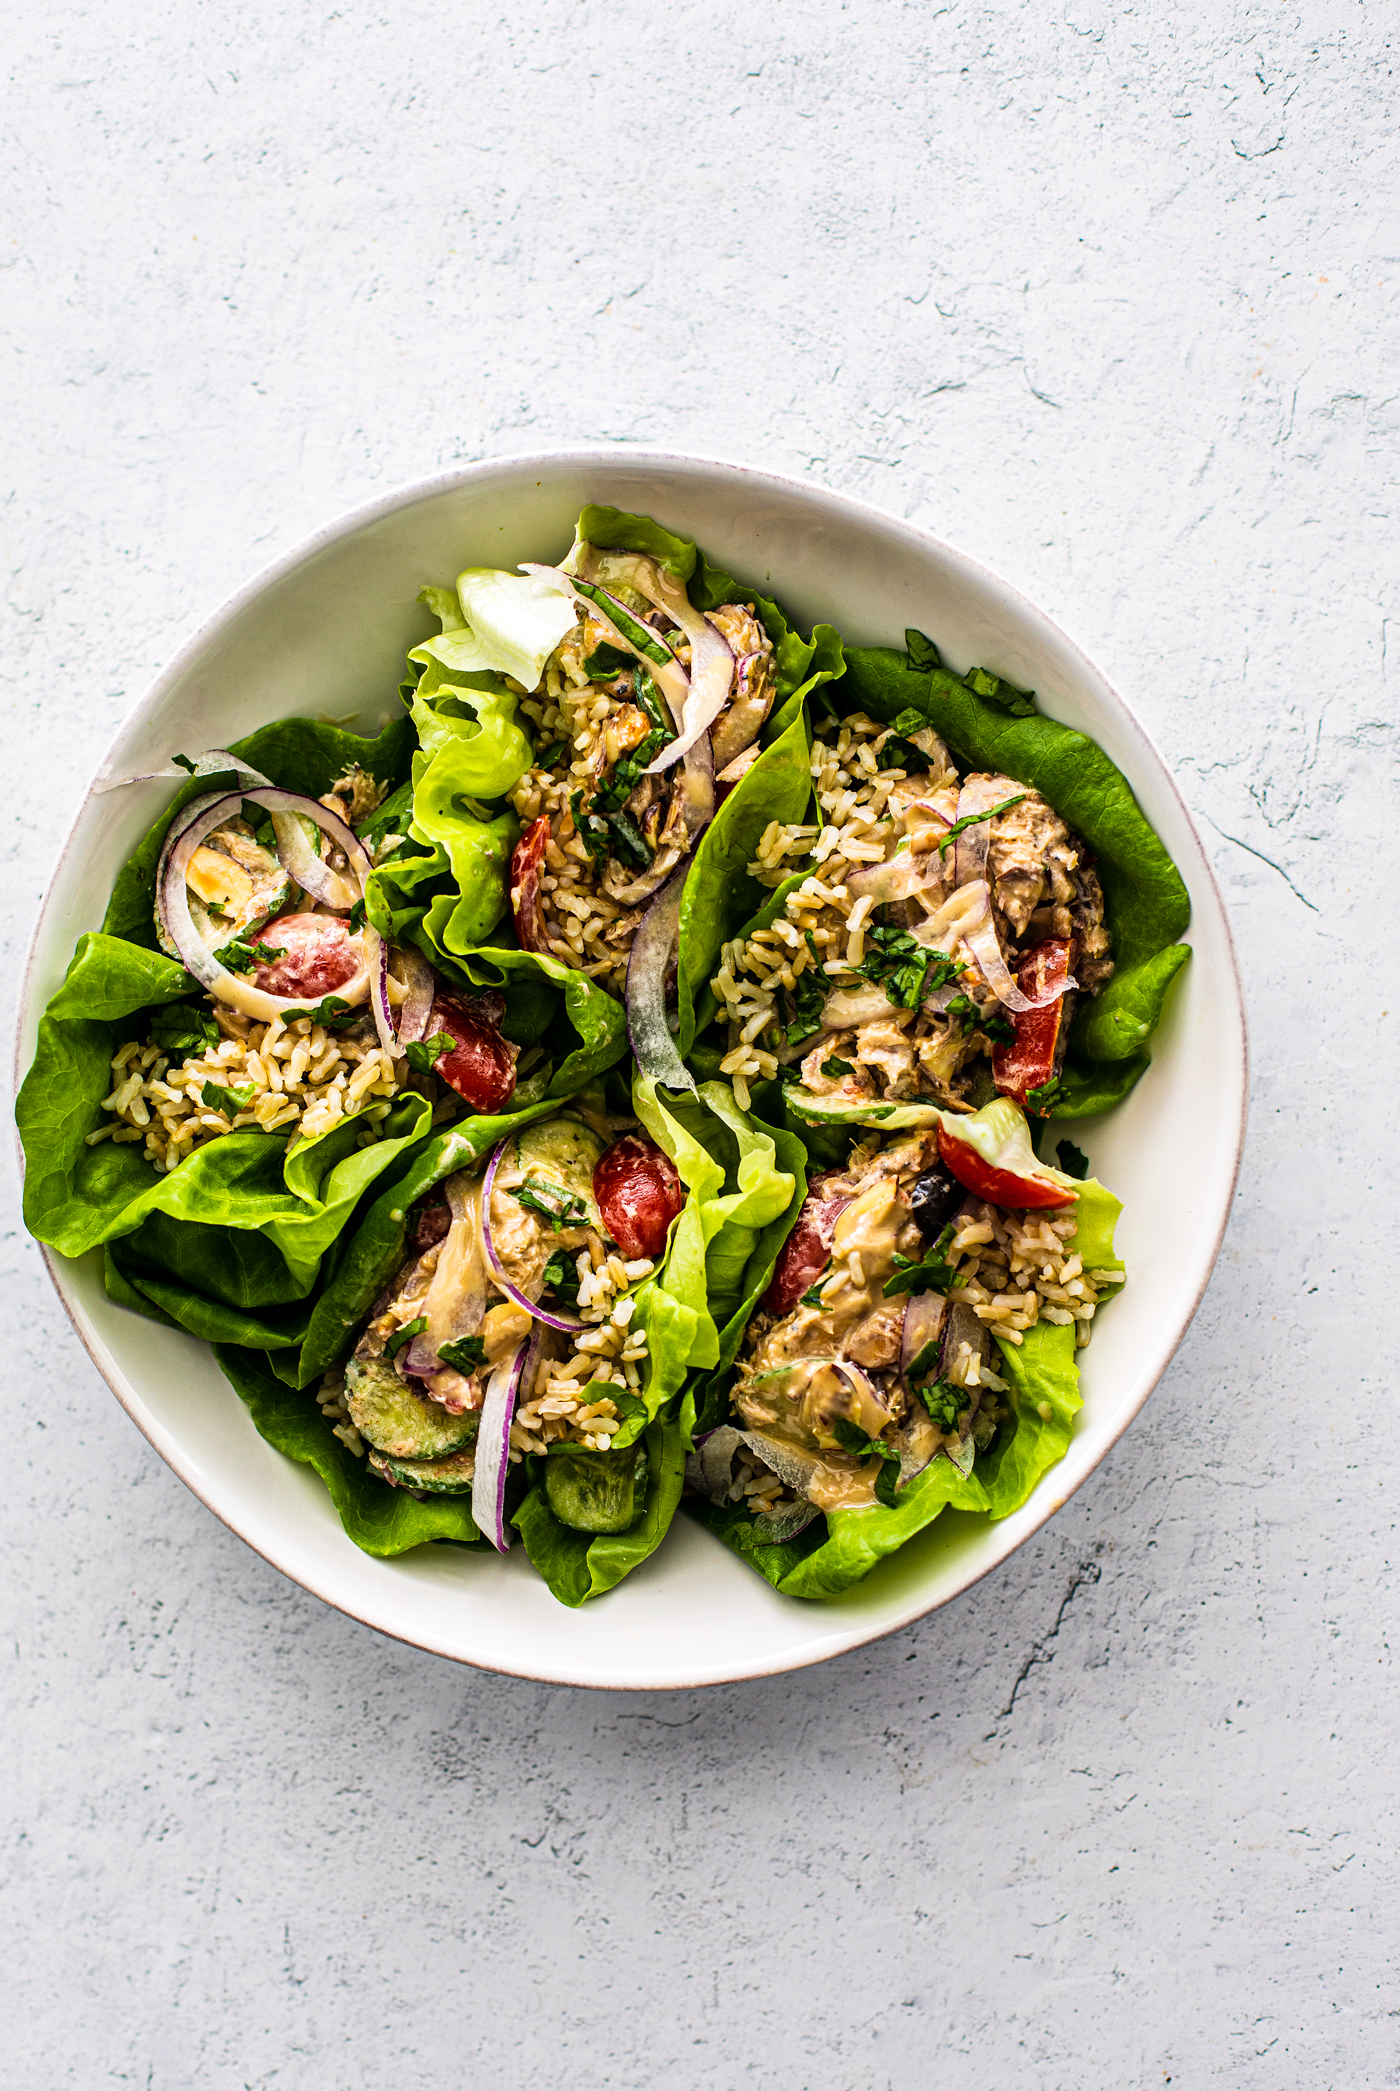 Lettuce wraps stuffed with rice and mackerel propped into a white serving bowl.